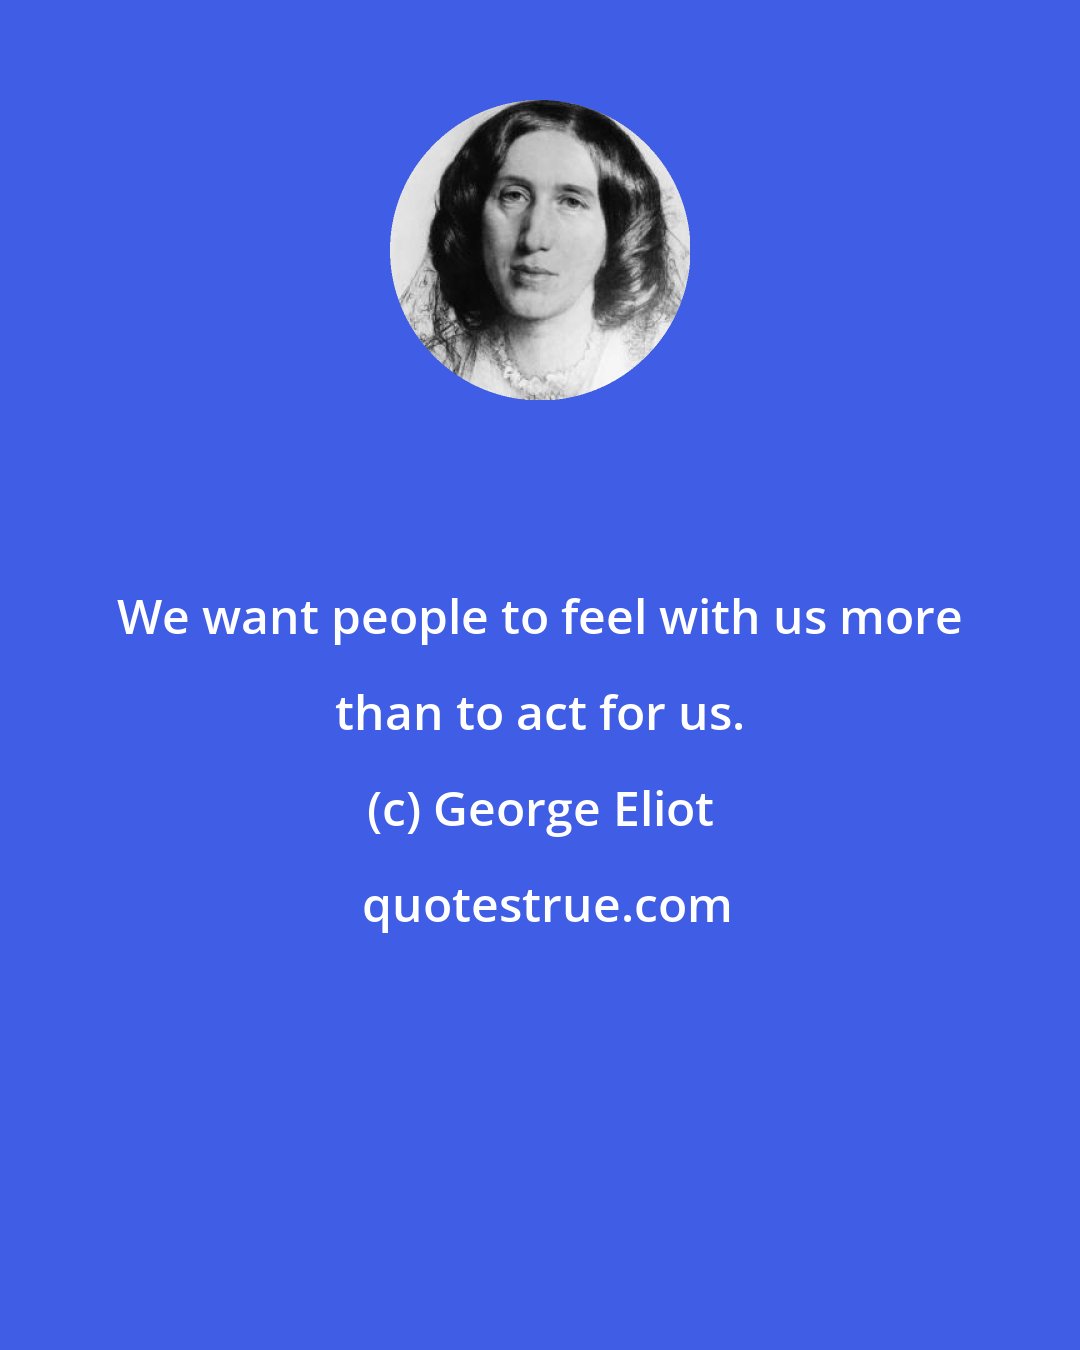 George Eliot: We want people to feel with us more than to act for us.